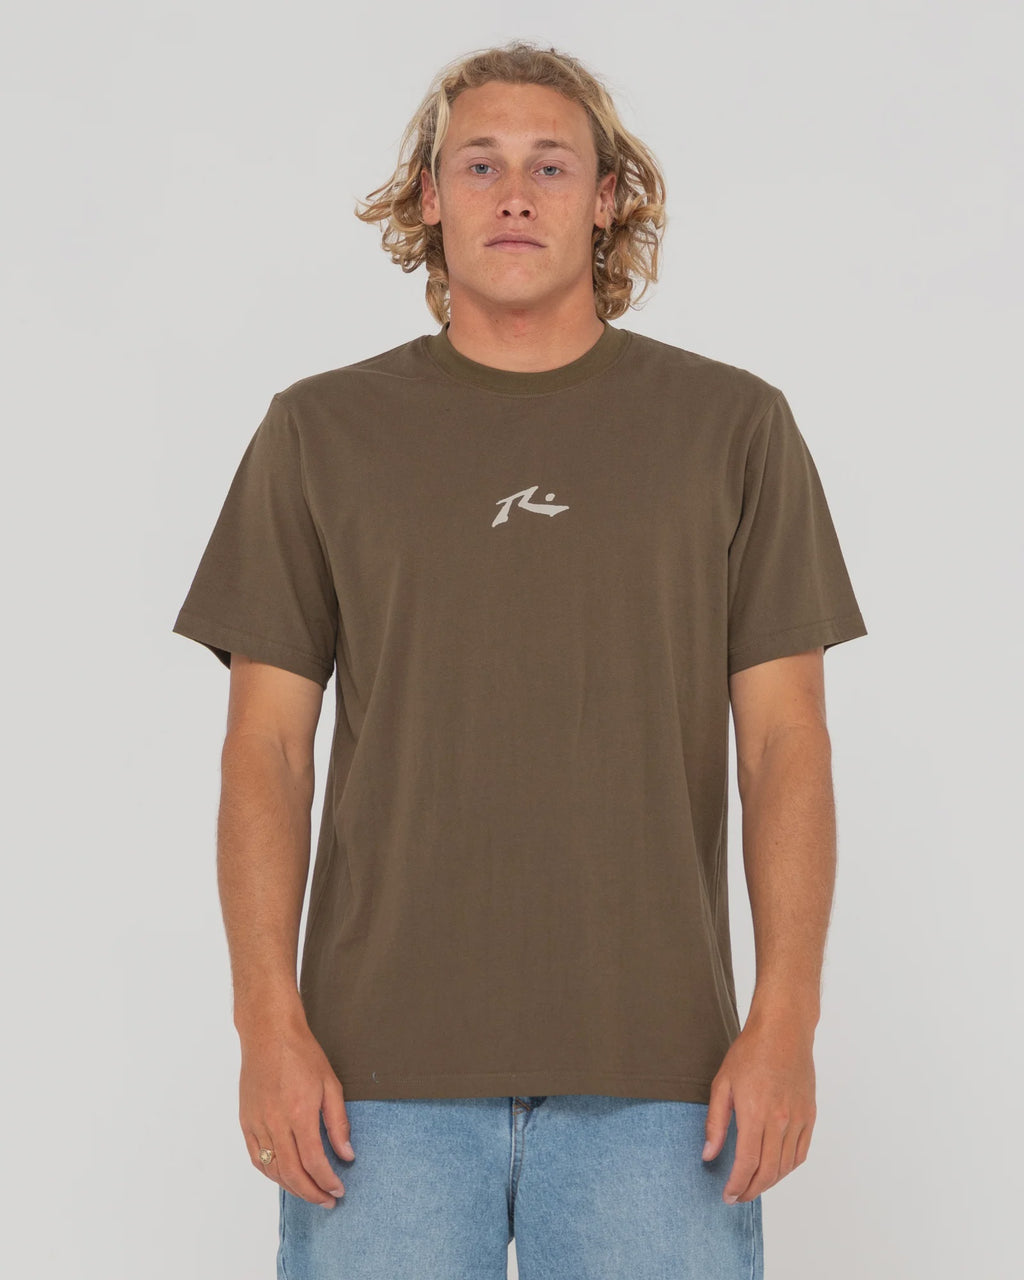 One Hit CF Competition S/S Tee - Rifle Green